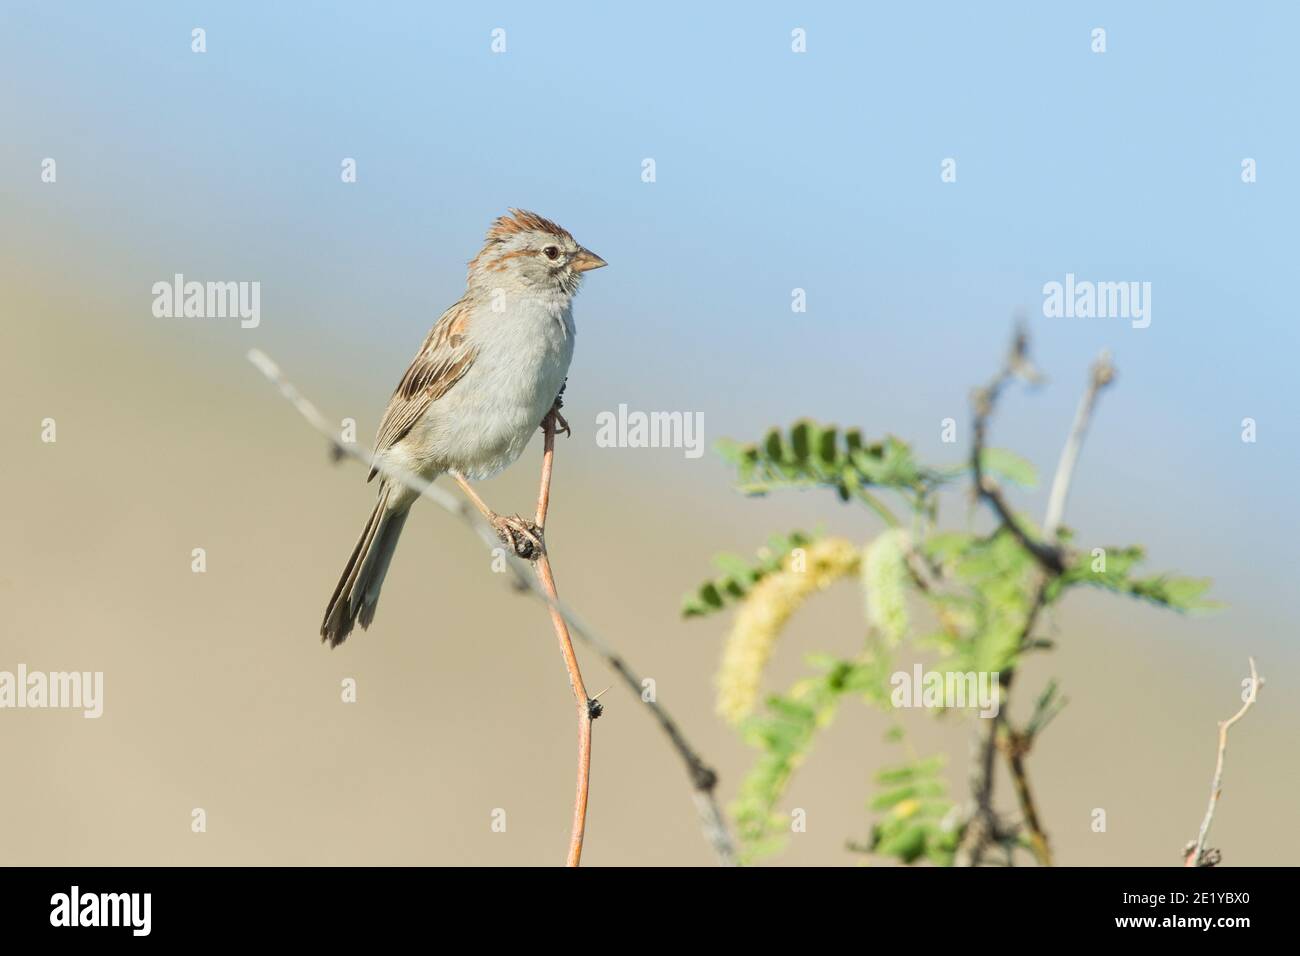 Rufous-winged Sparrow, Peucaea carpalis, perched in mesquite tree. Stock Photo